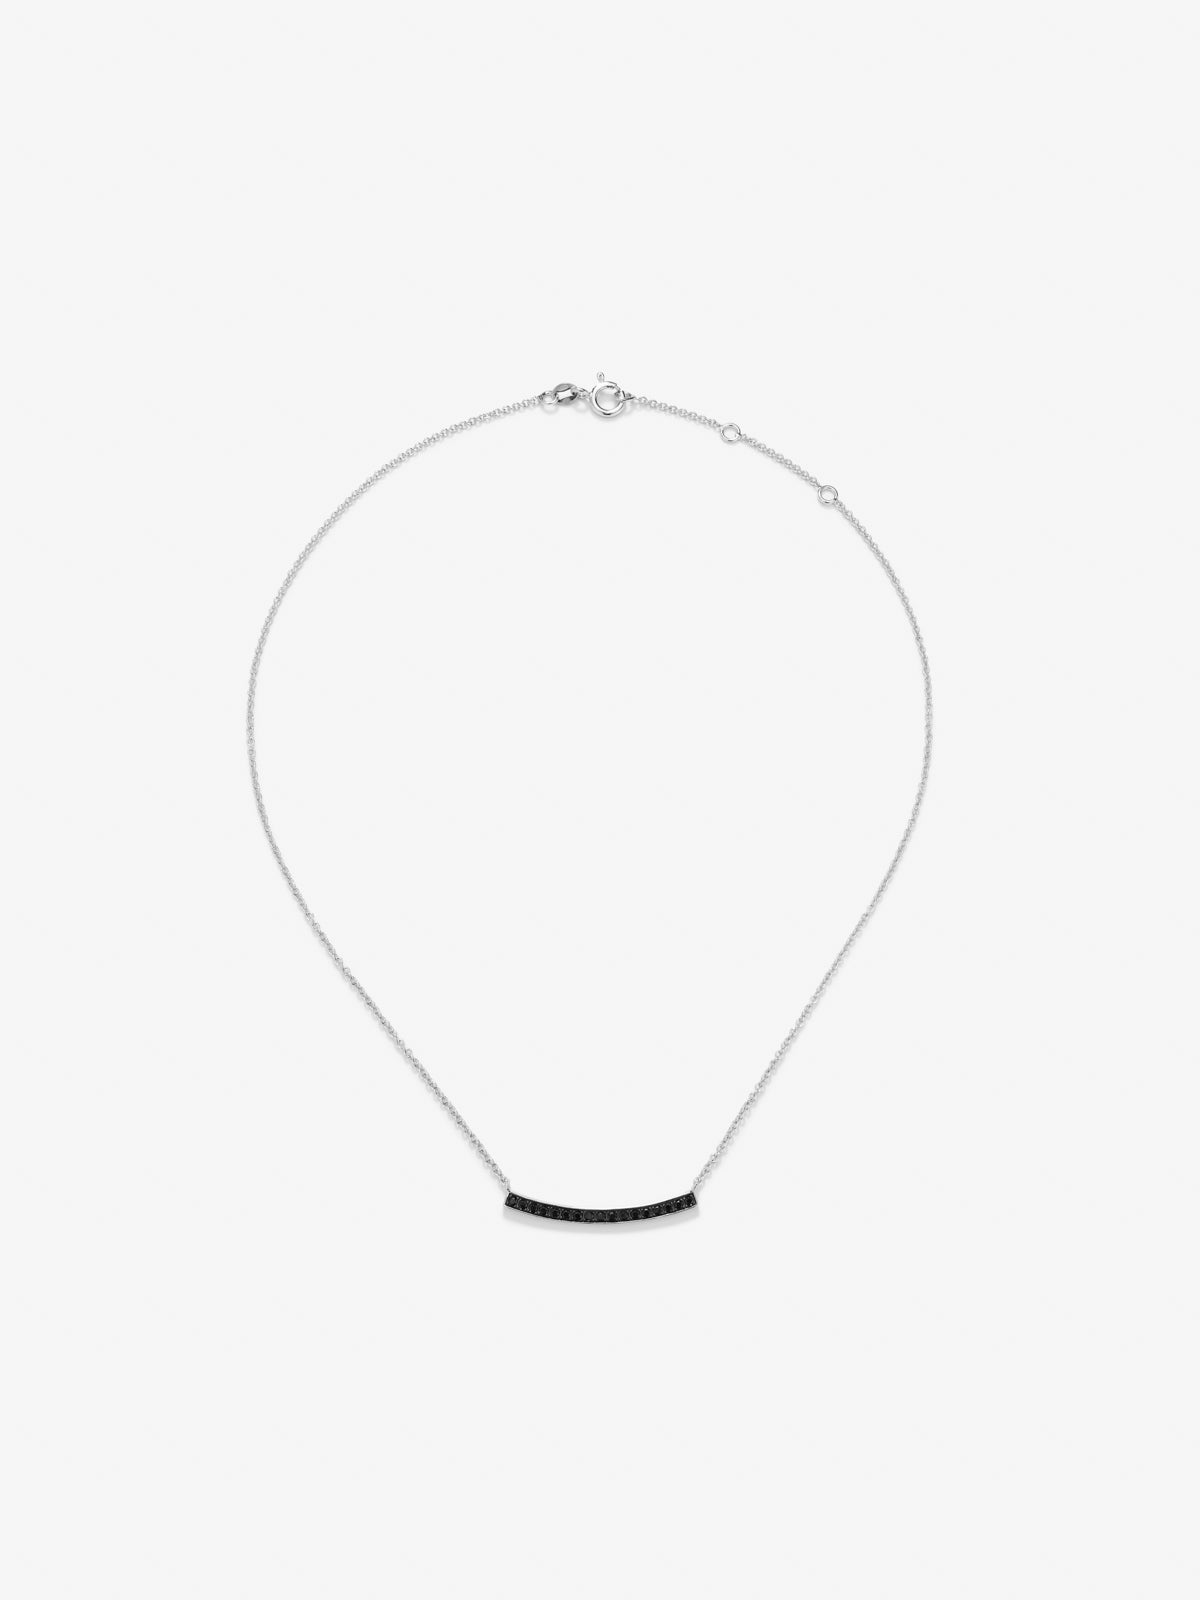 925 silver necklace with stars and black spinels in brilliant cut of 0.43 cts